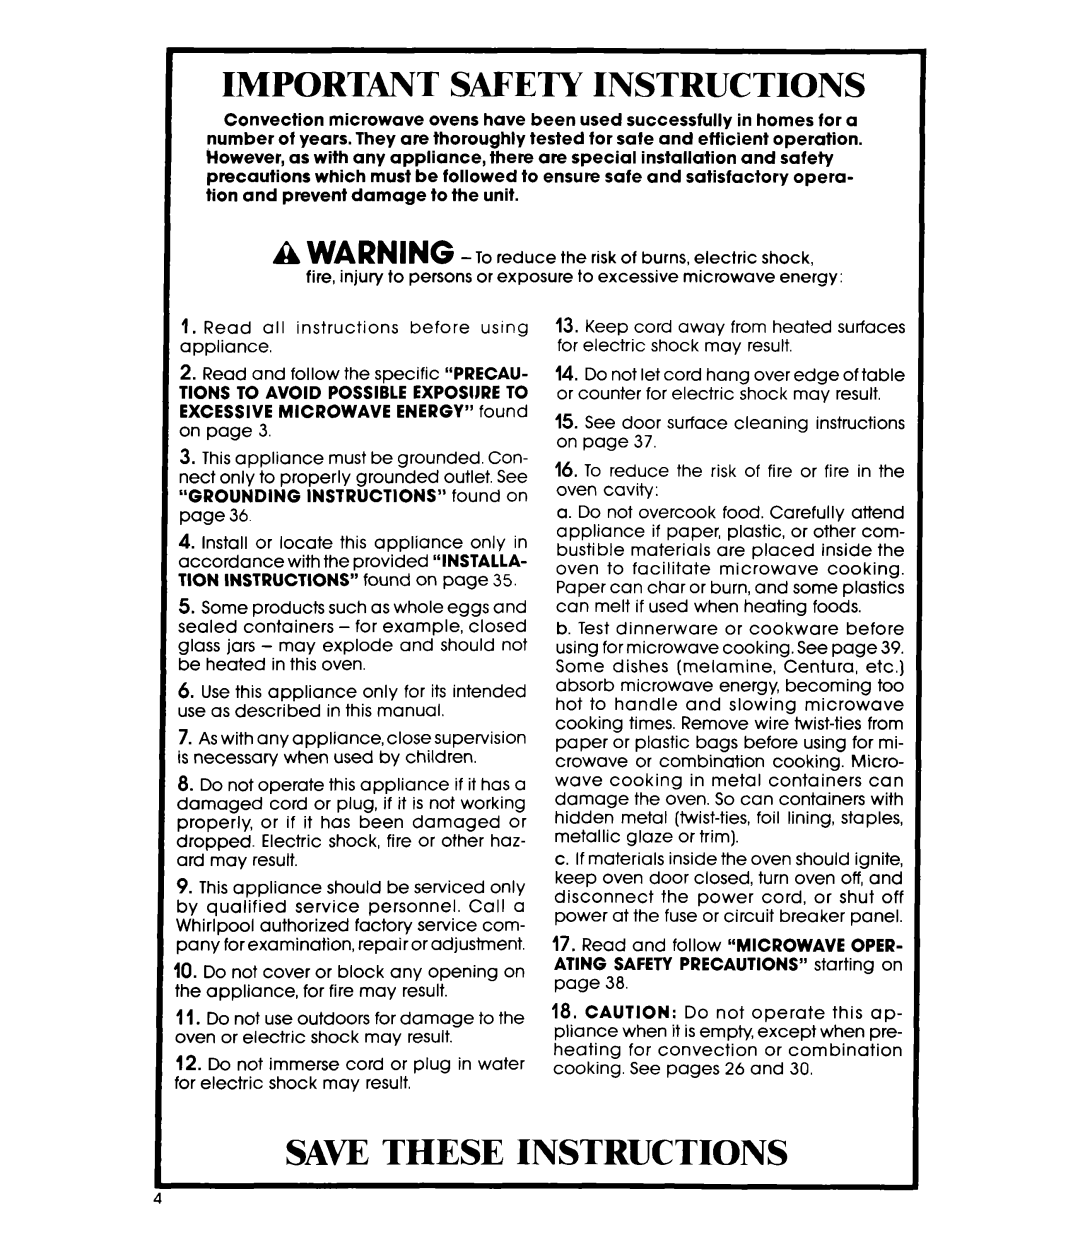 Whirlpool MC8991XT, MC8990XT manual Important Safety Instructions, Save These Instructions 